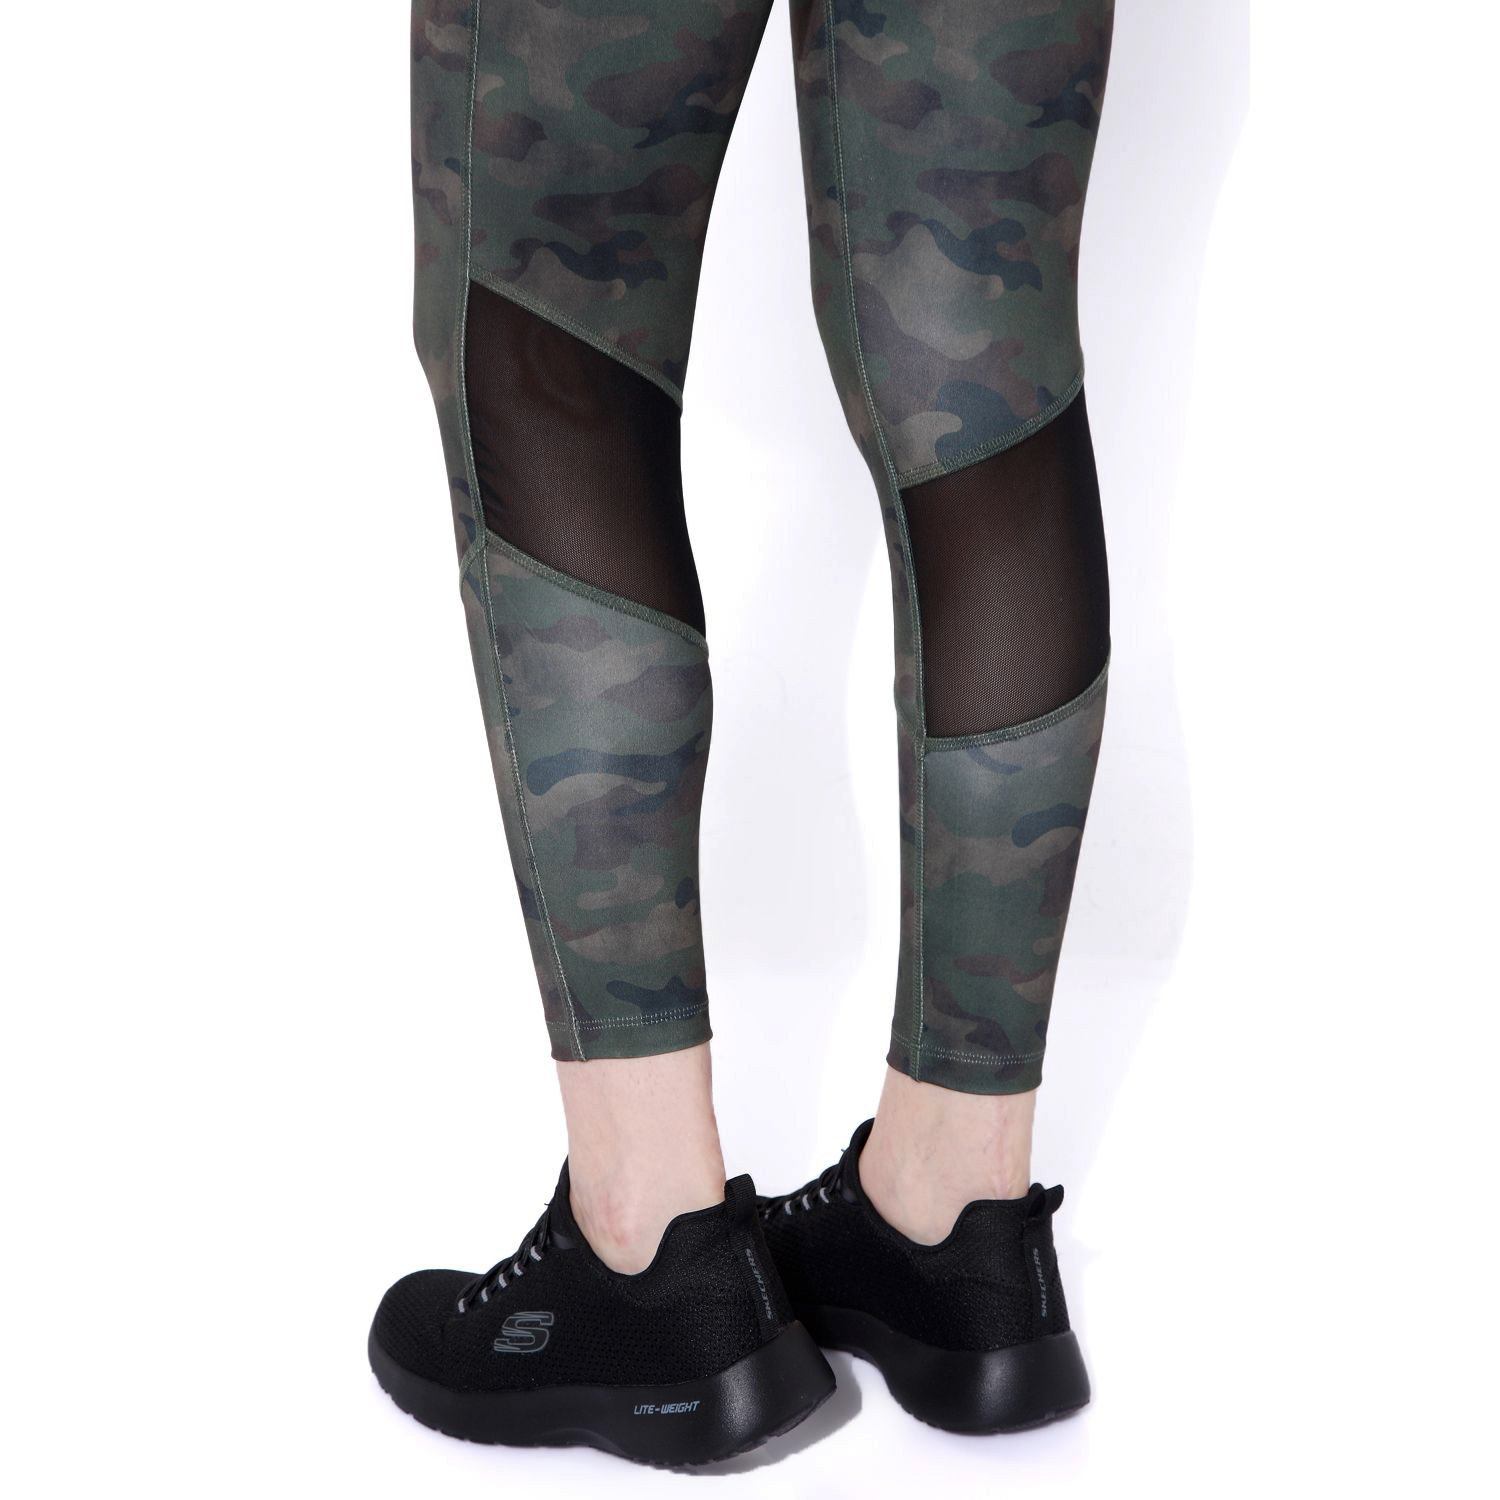 Buy 3298_Rothco Womens Camo Leggings - Rothco Online at Best price - PR